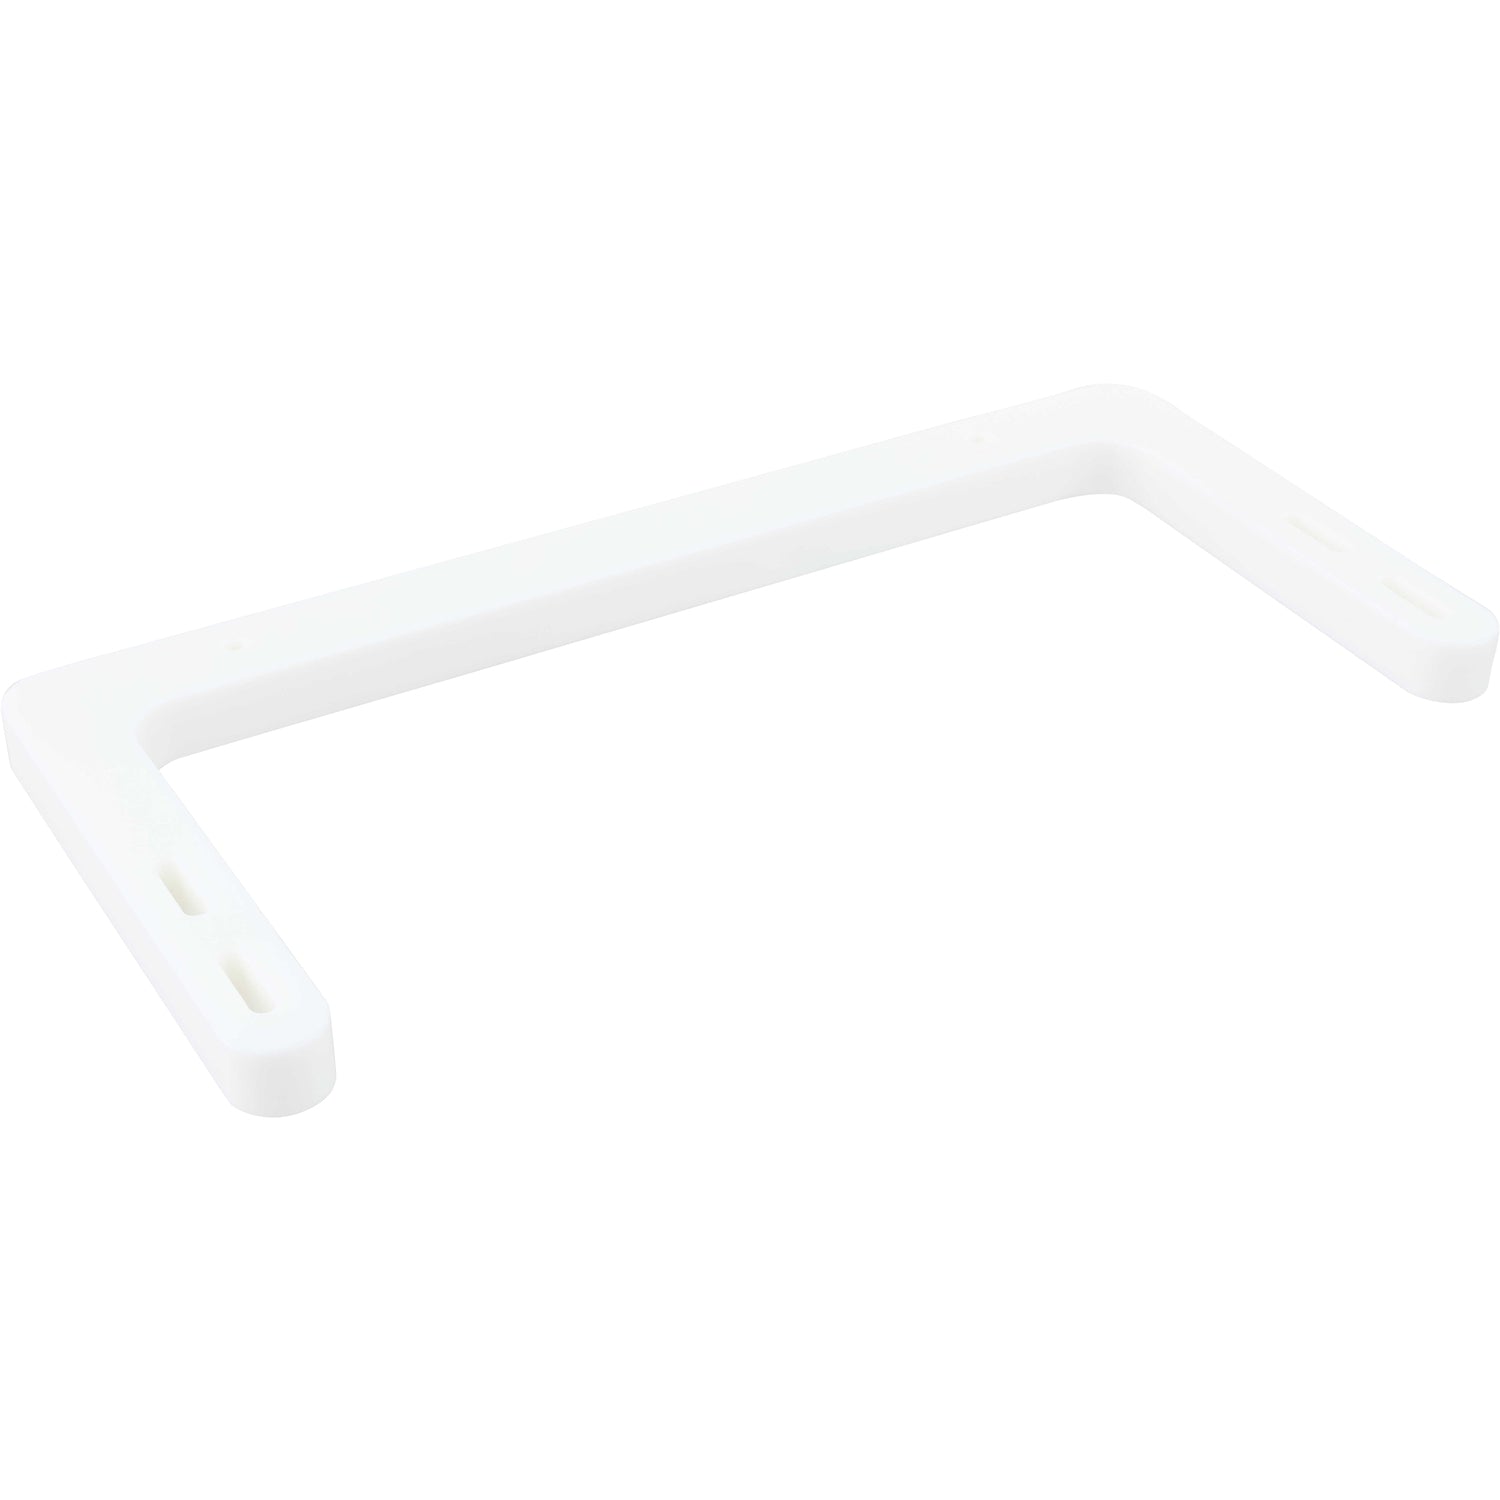 Machined white HDPE rail with holes used for mounting. Shown on white background.